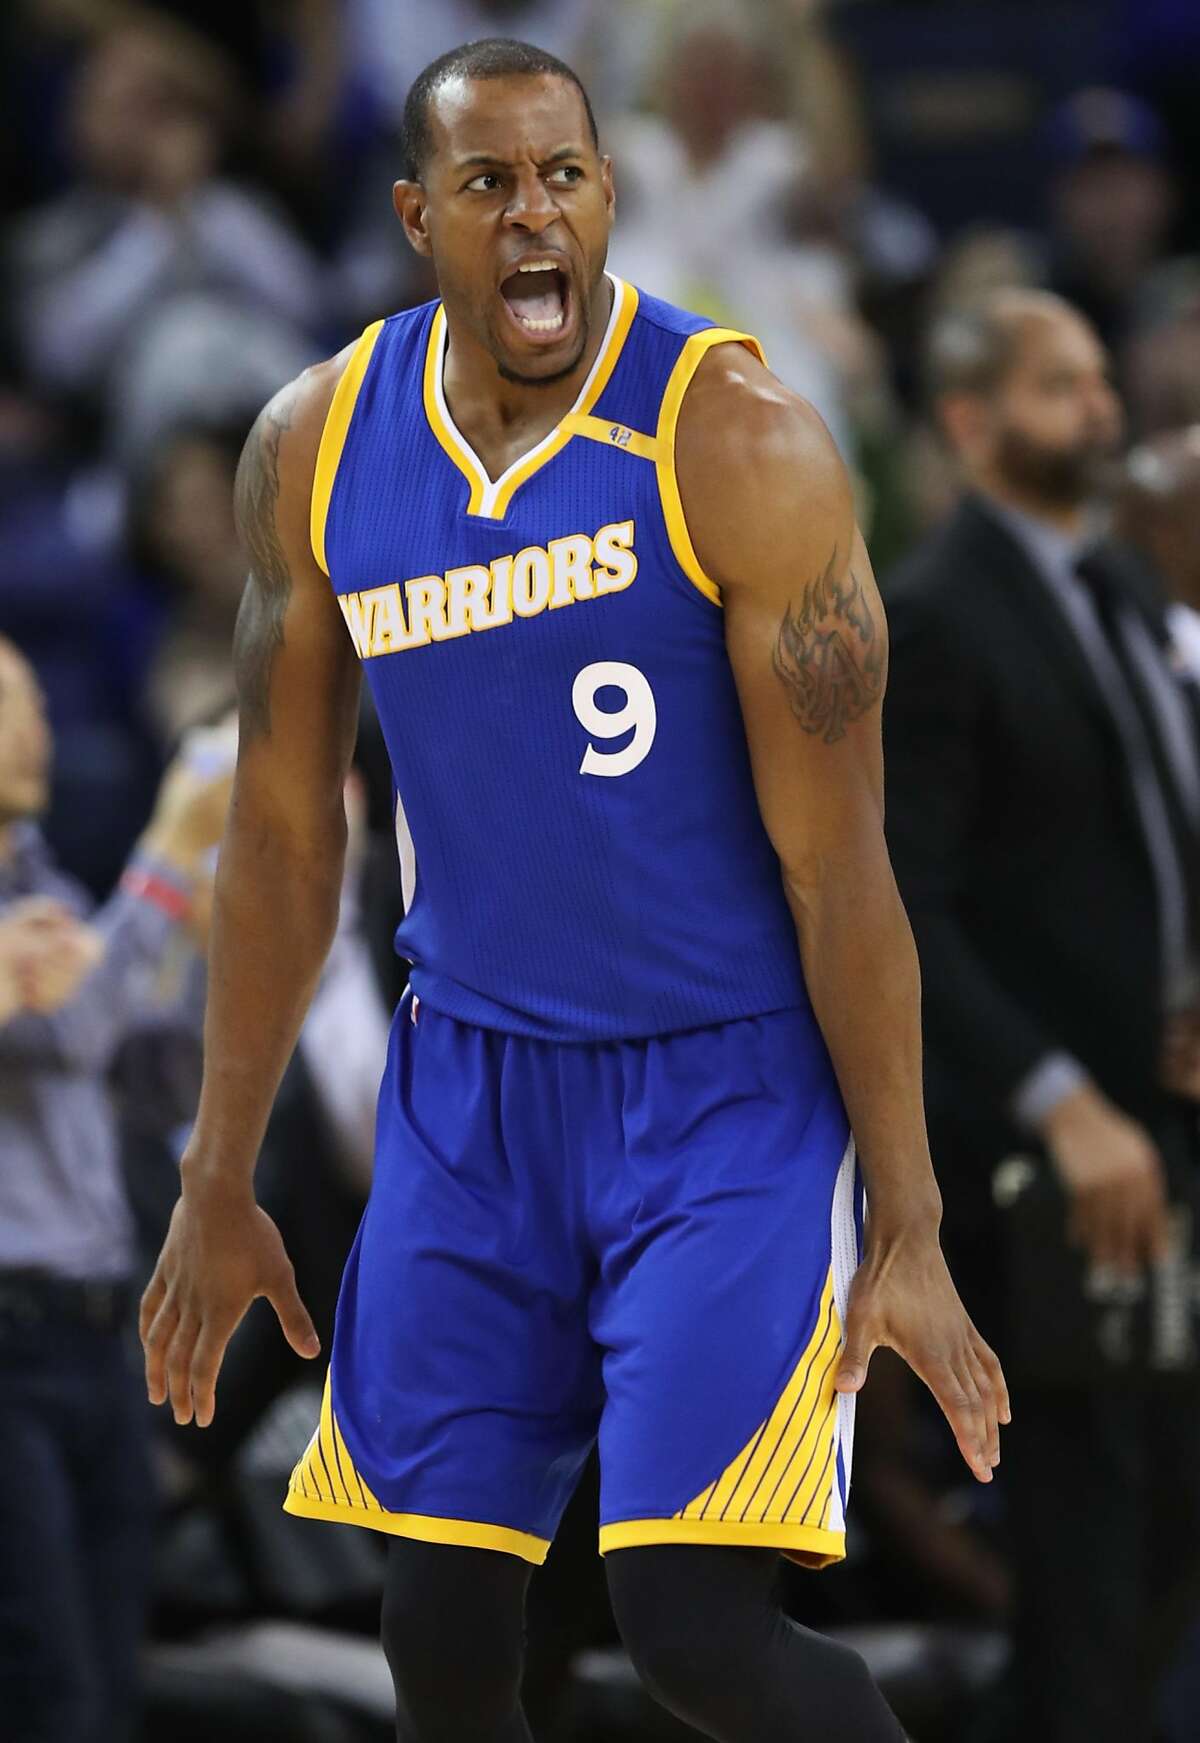 Golden State Warriors' Andre Iguodala celebrates his dunk in 4th quarter during Warriors' 106-94 win over Memphis Grizzlies in NBA game at Oracle Arena in Oakland, Calif., on Sunday, March 26, 2017.